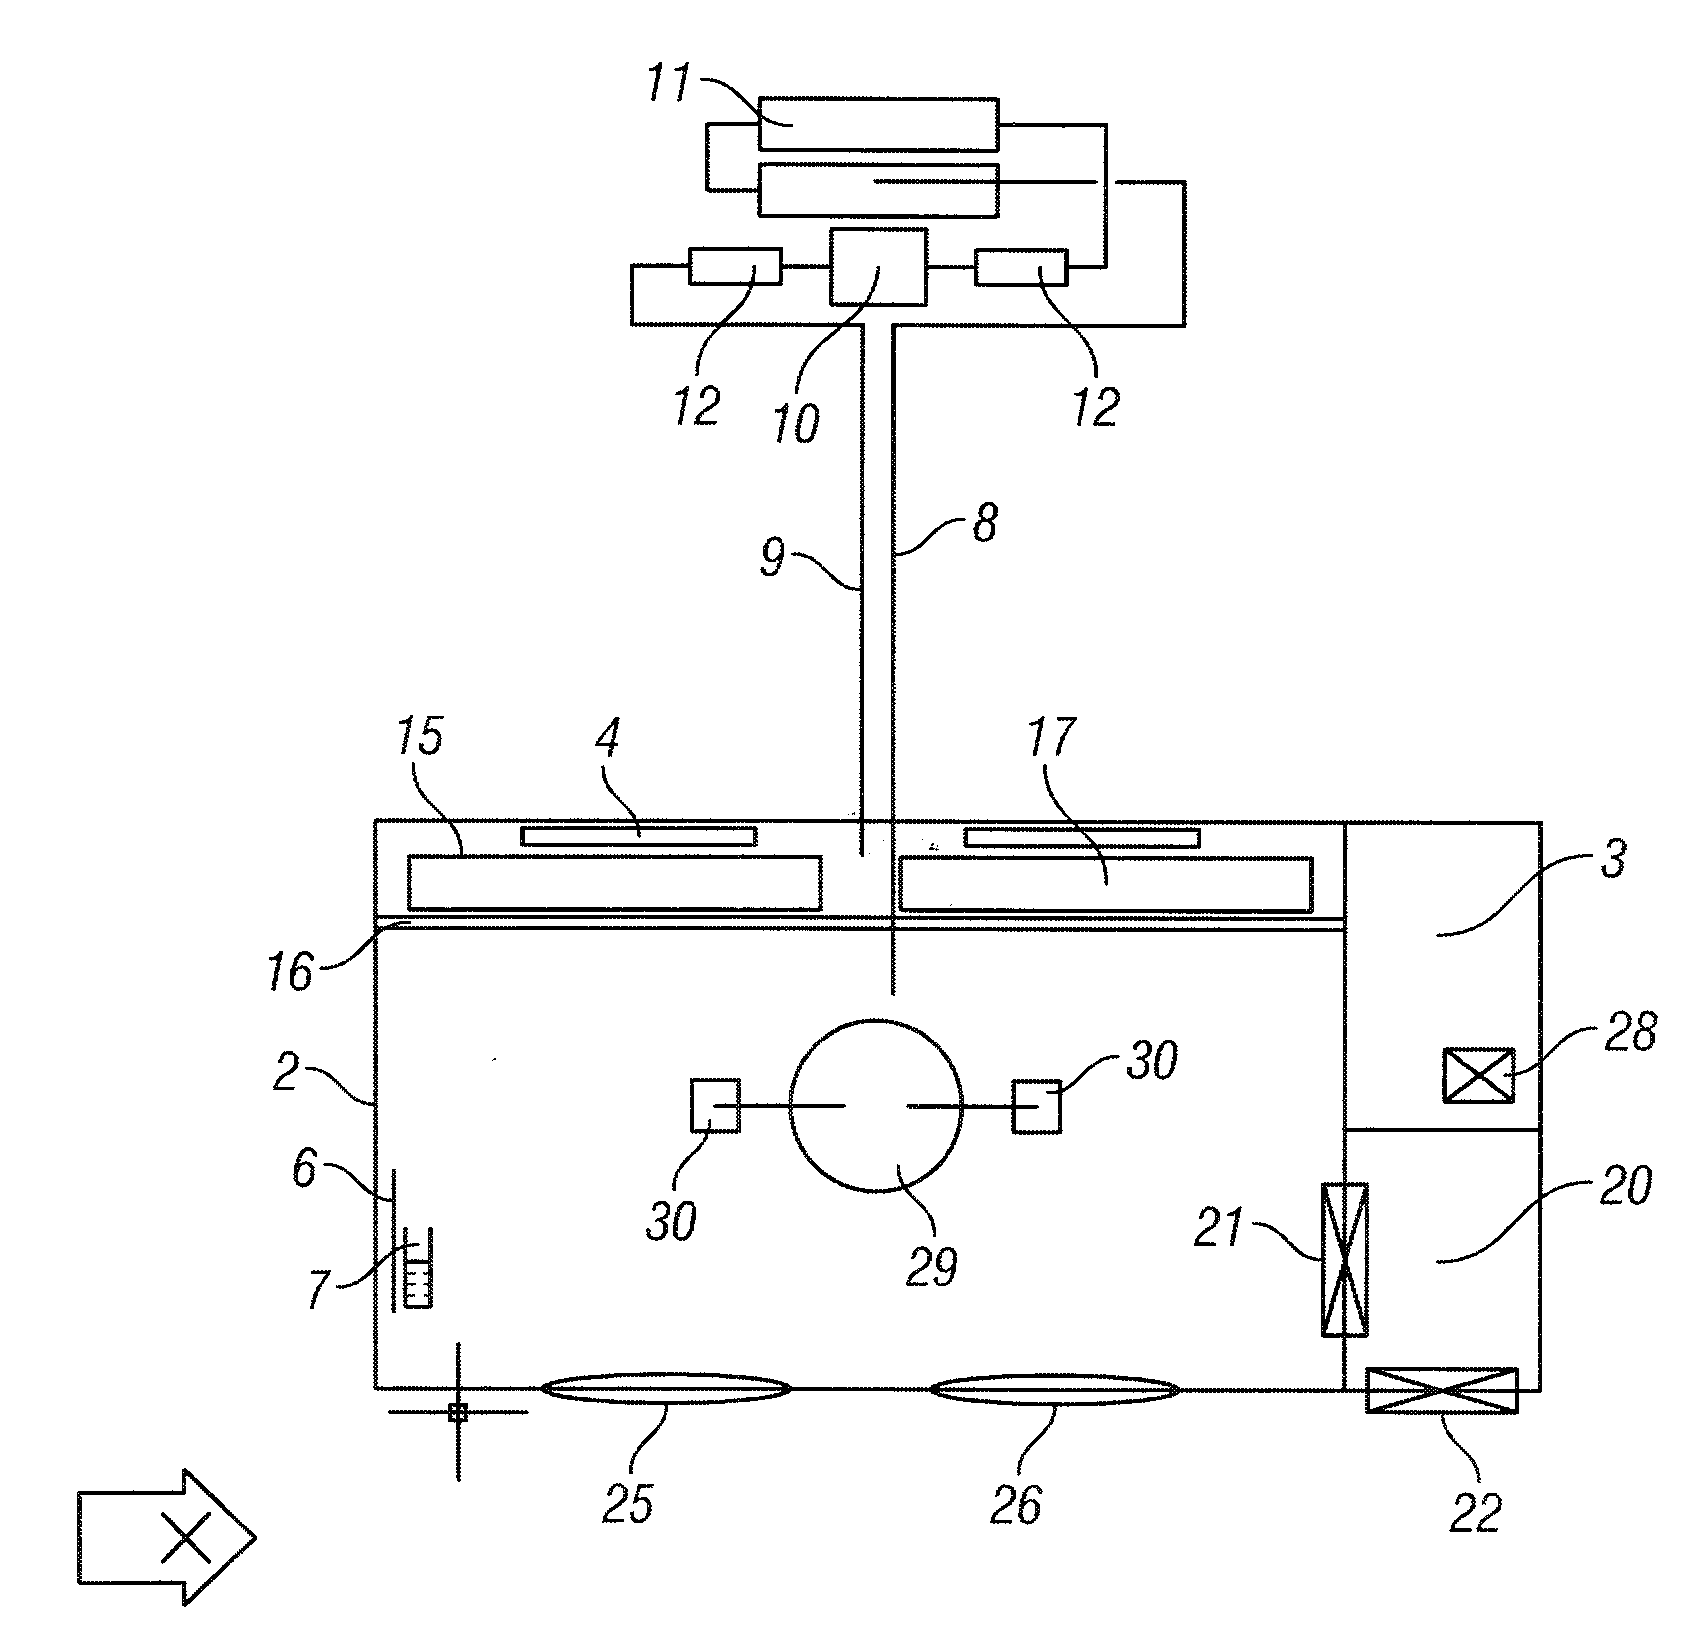 Laboratory Apparatus for a Controlled Environment